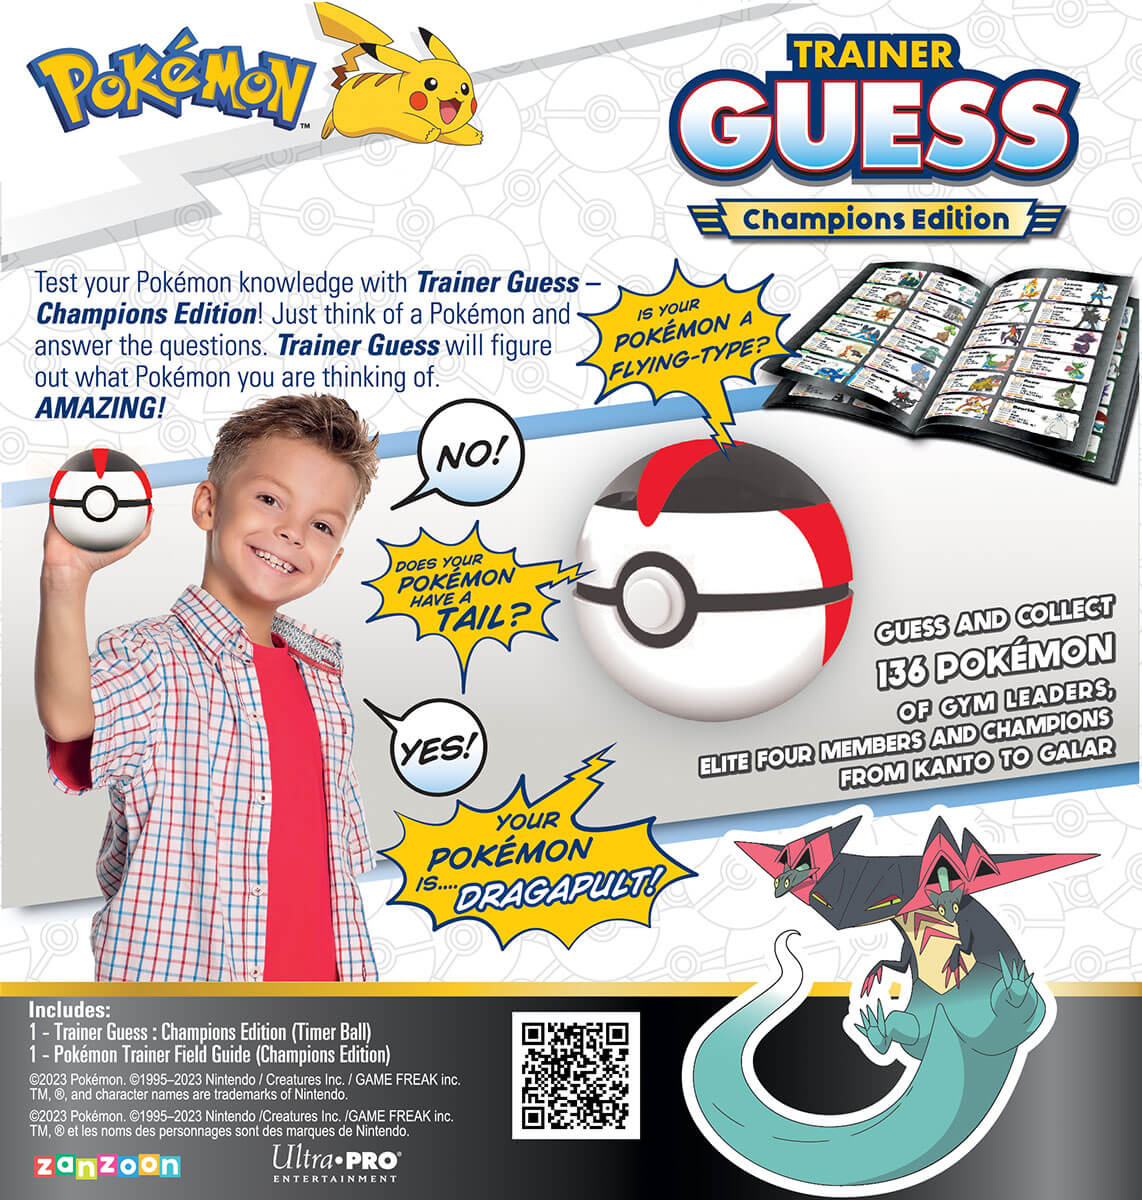 Pokémon Trainer Guess: Champions Edition | An Electronic Game for